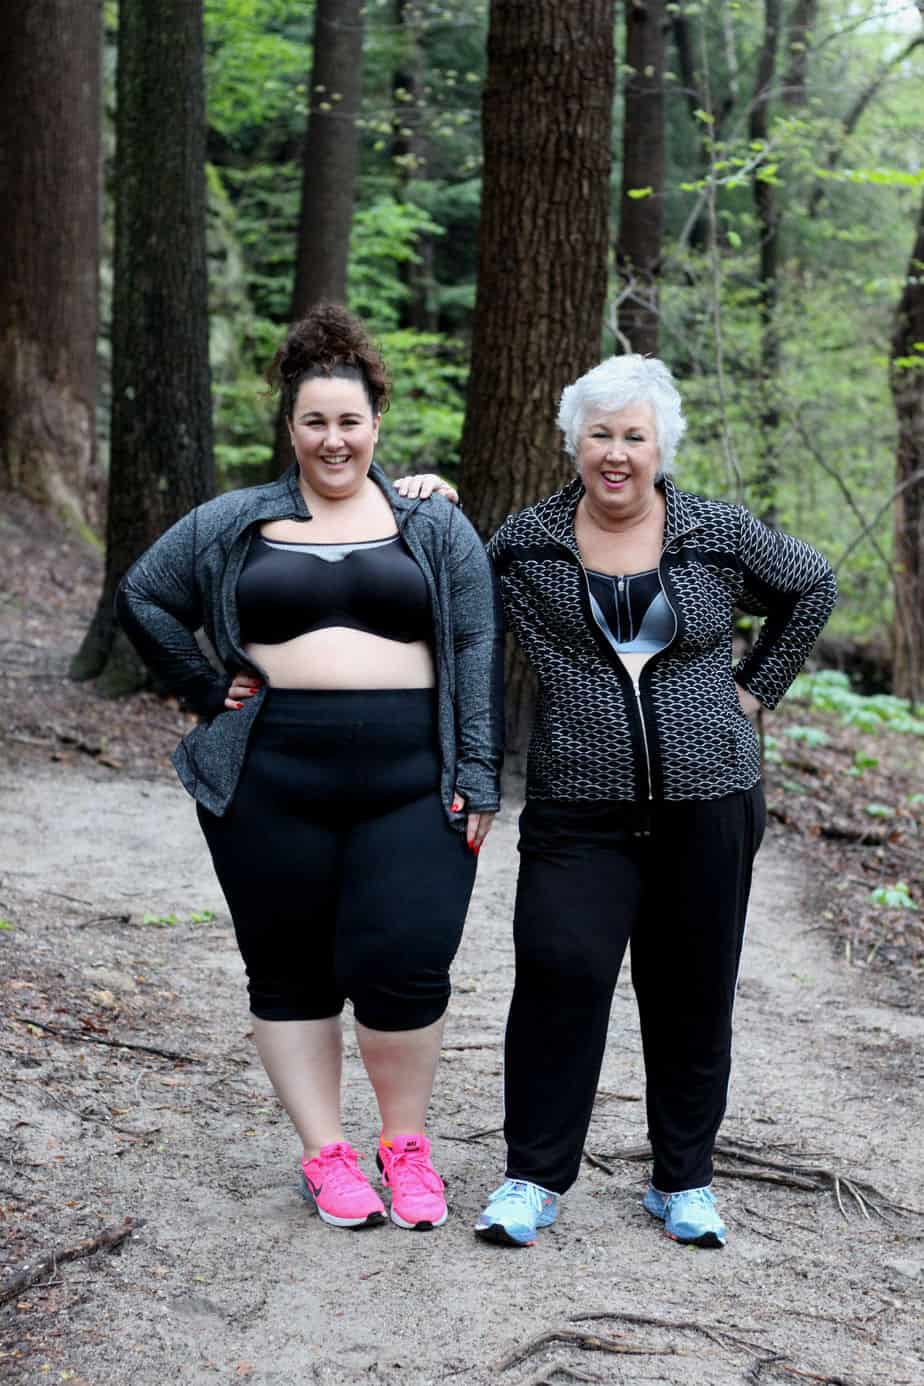 Celebrating Mother's Day In Curvy Couture Plus Size Sports Bras